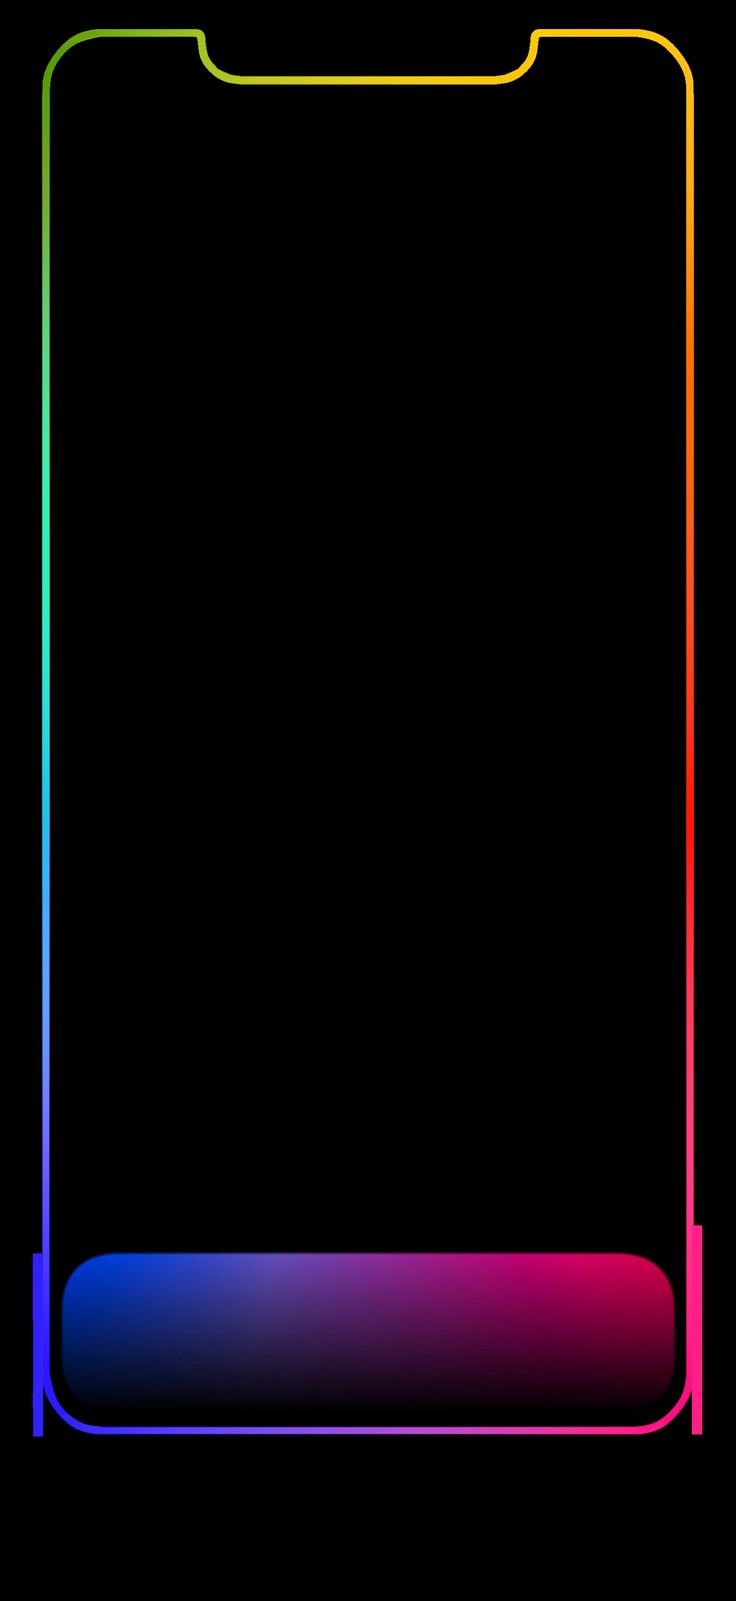 Iphone x frame Wallpapers Download | MobCup